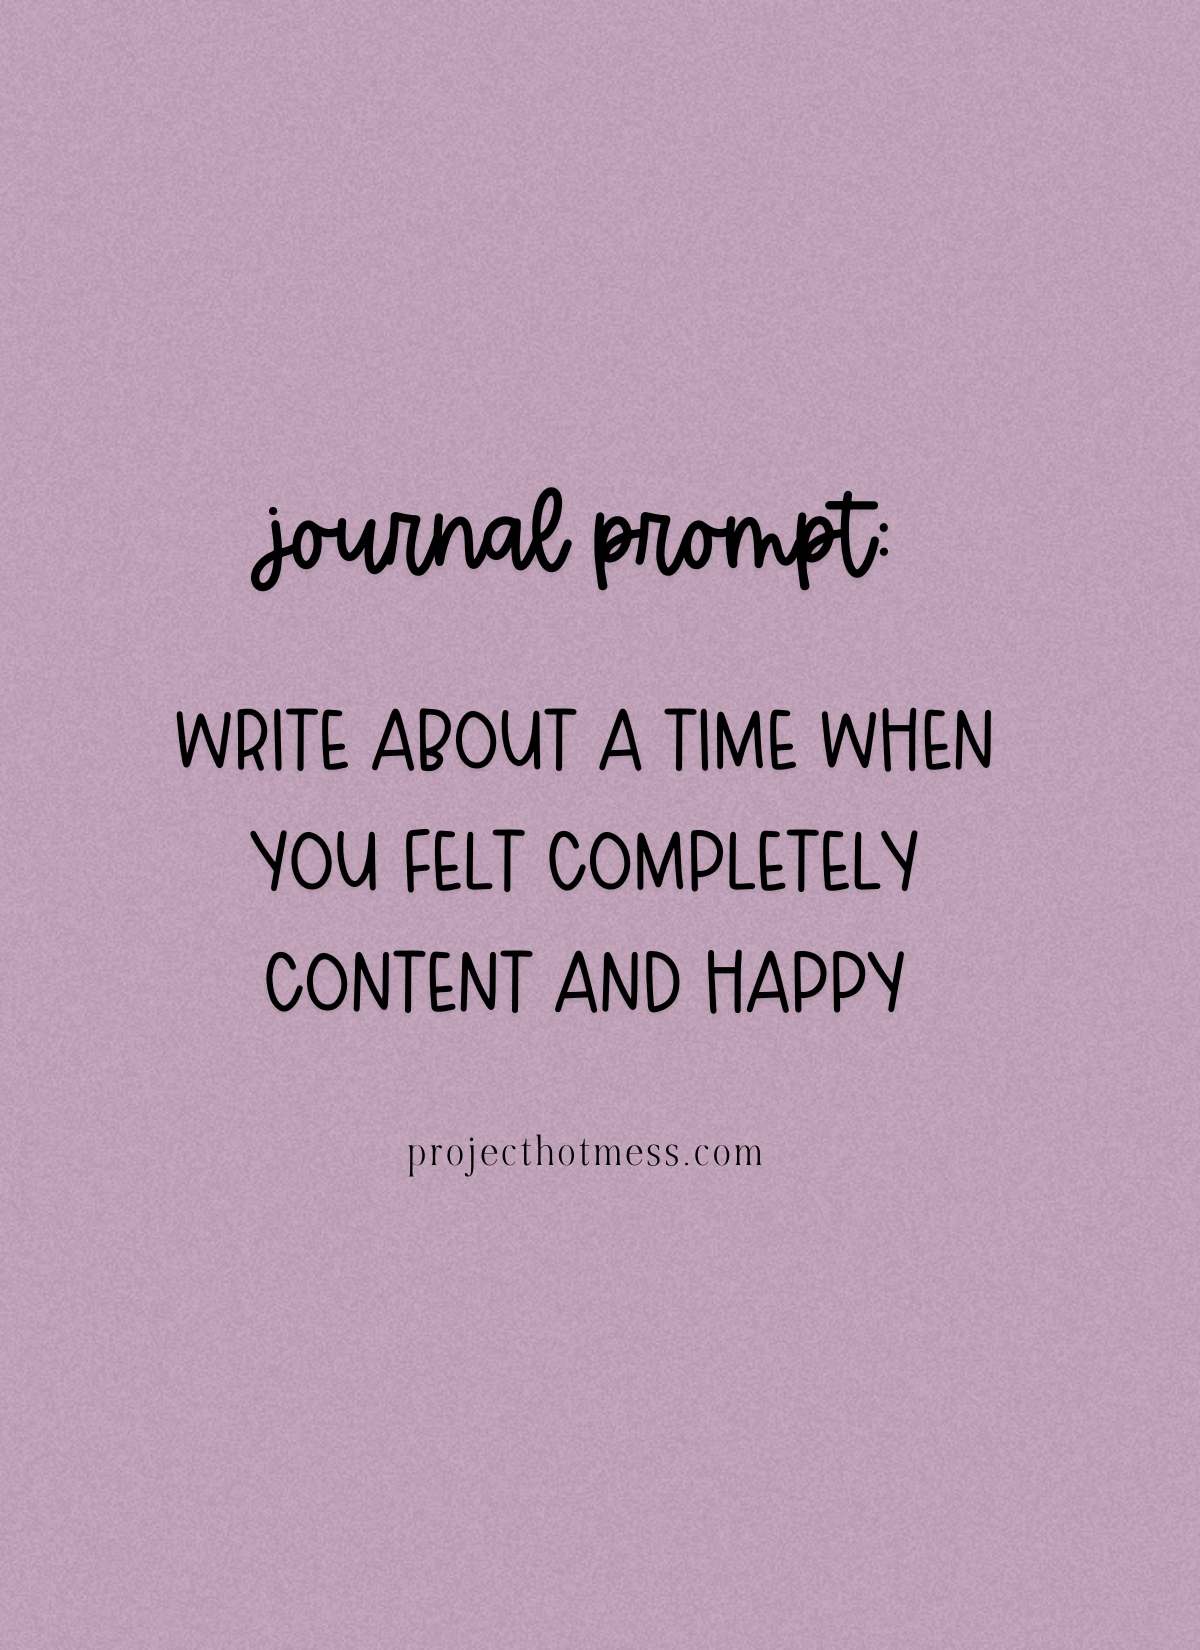 Get inspired and set goals for the new year with these January journal prompts. From reflecting on the past year to creating a vision for the future, these prompts will help you start the year off on the right foot.